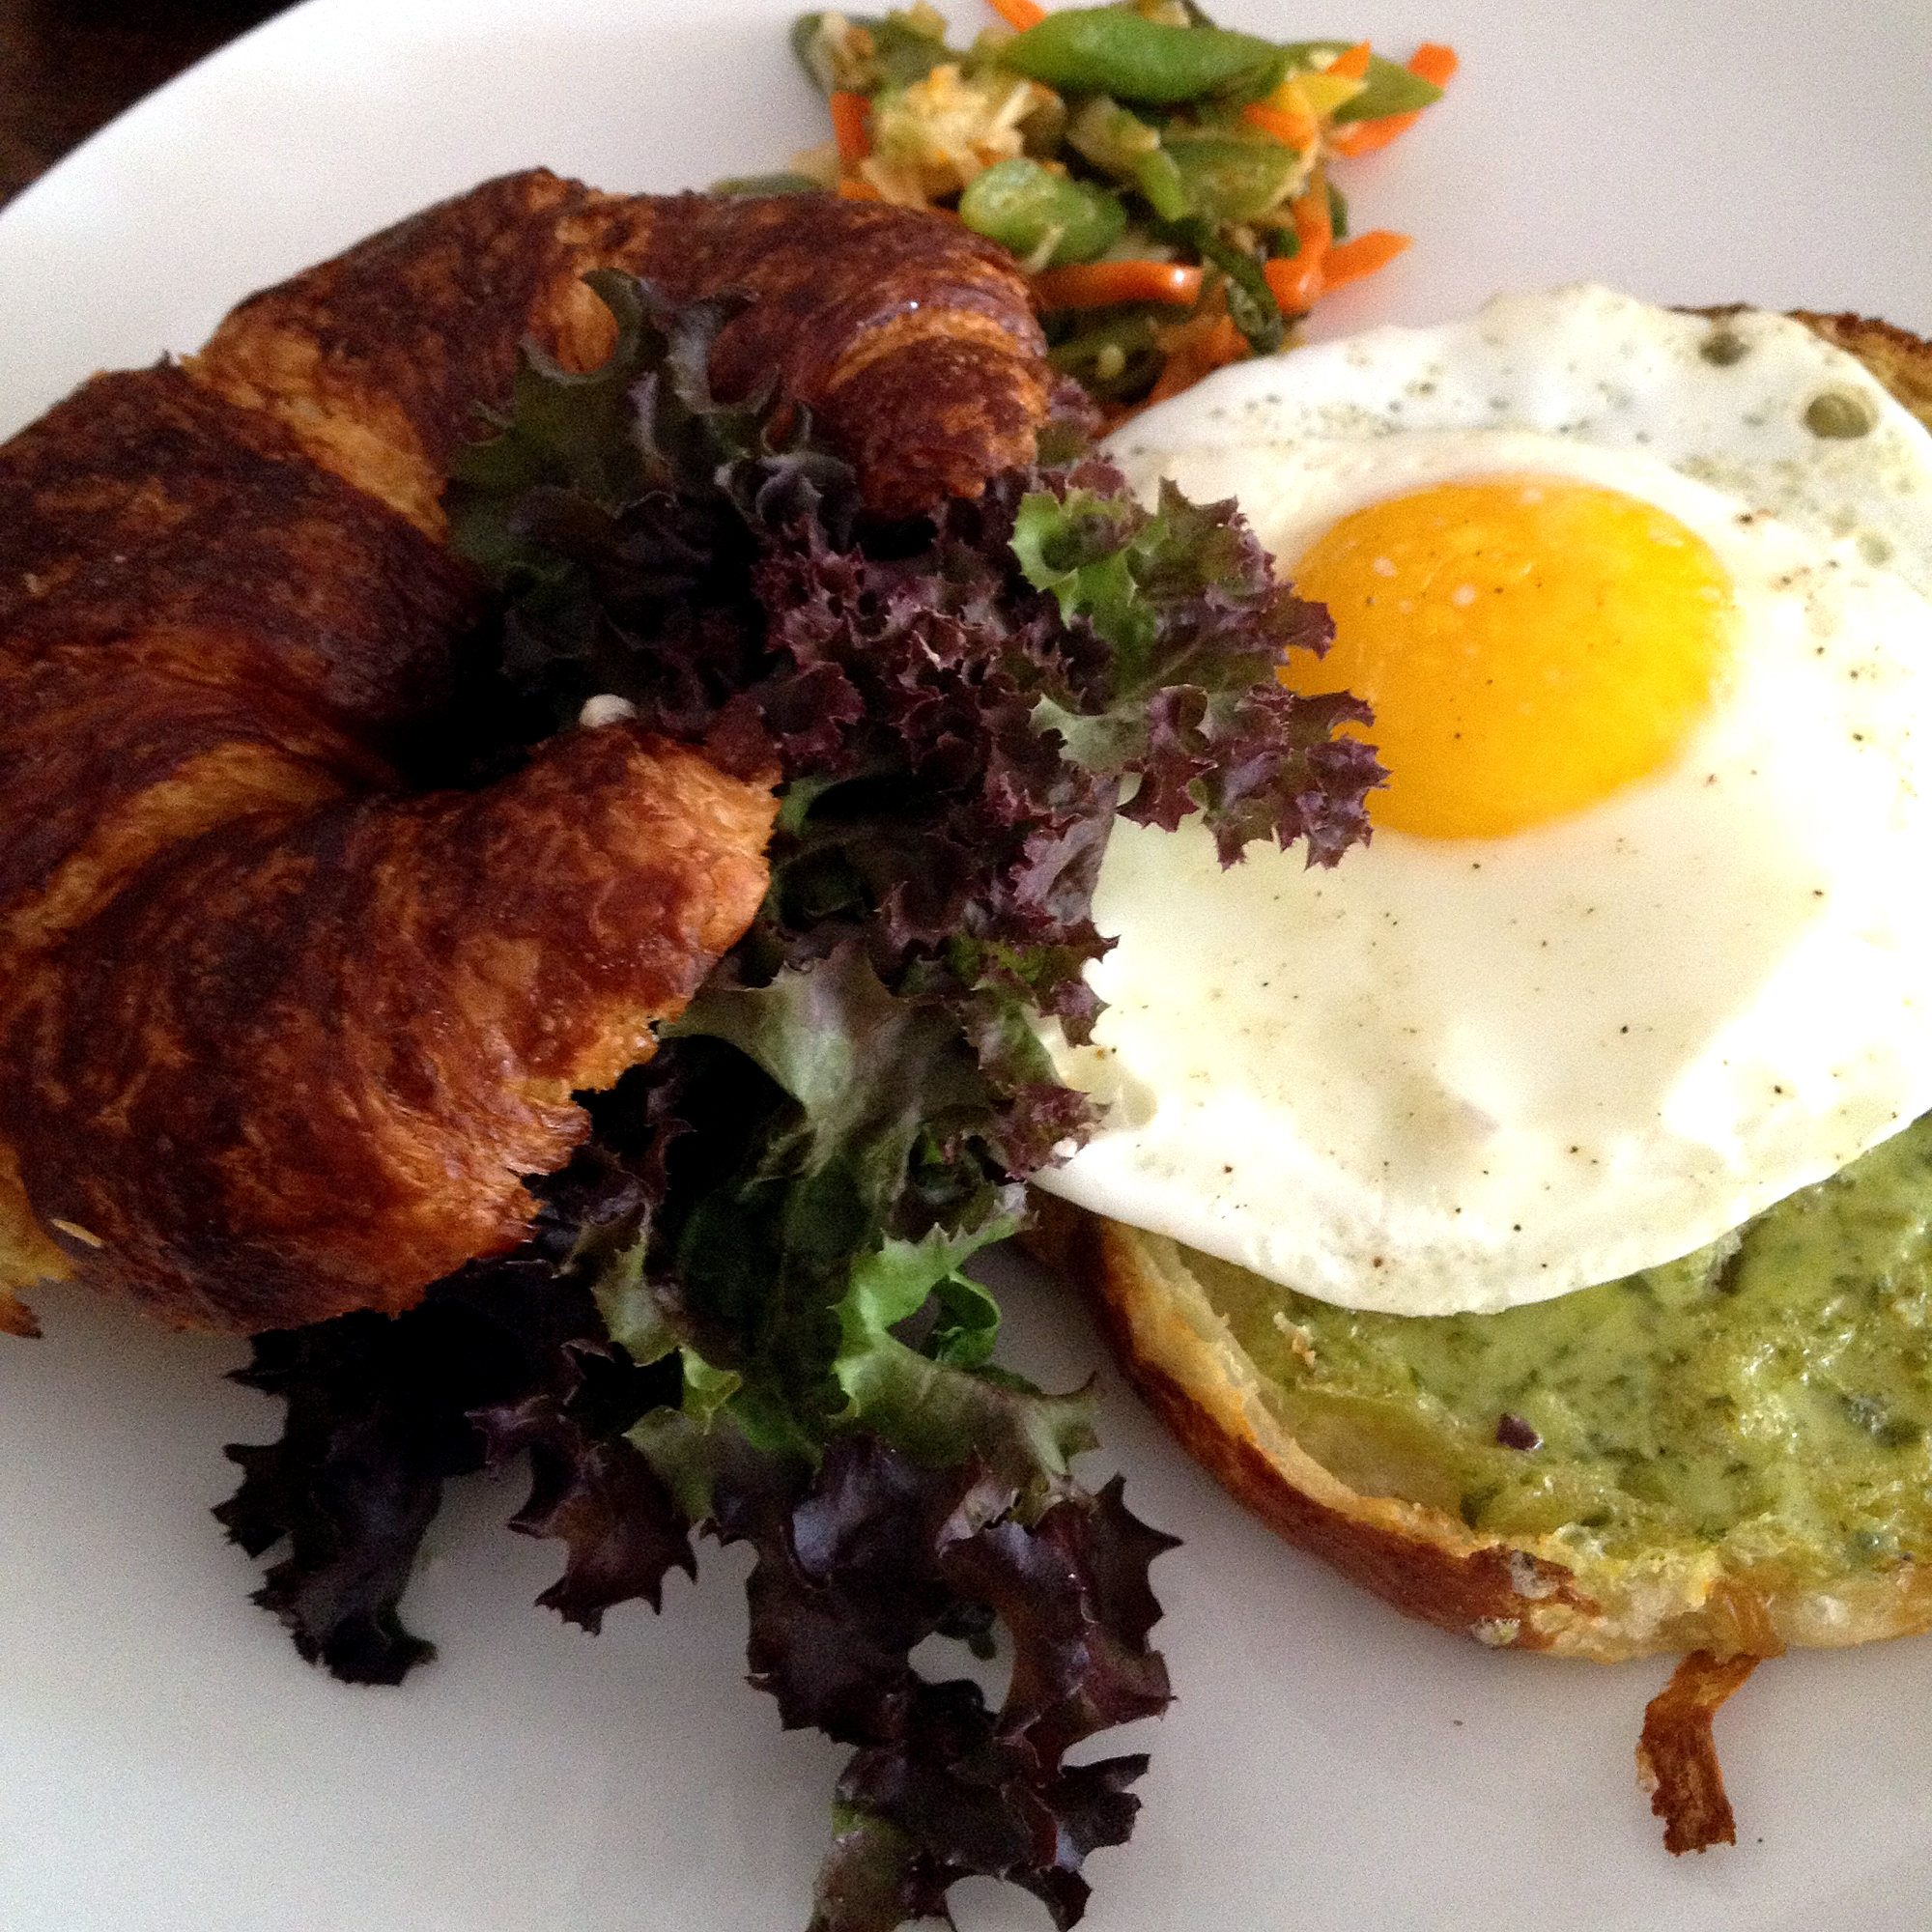 Dining doesn’t get more local than brunch at Harvest